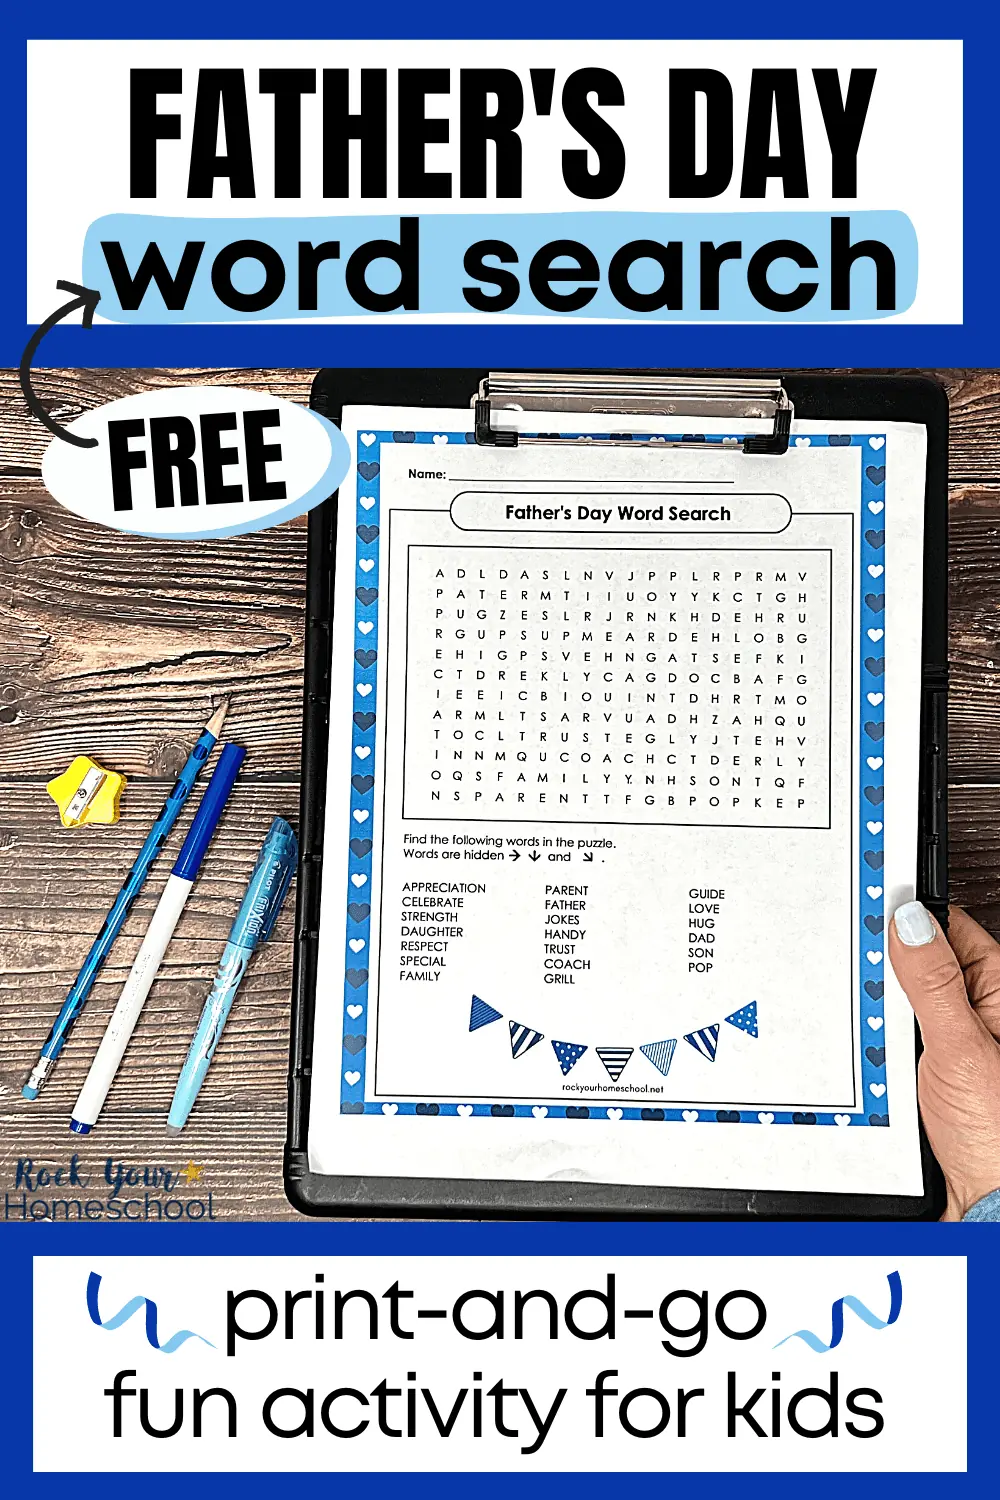 Father’s Day Word Search for a Fun Activity for Kids (Free)